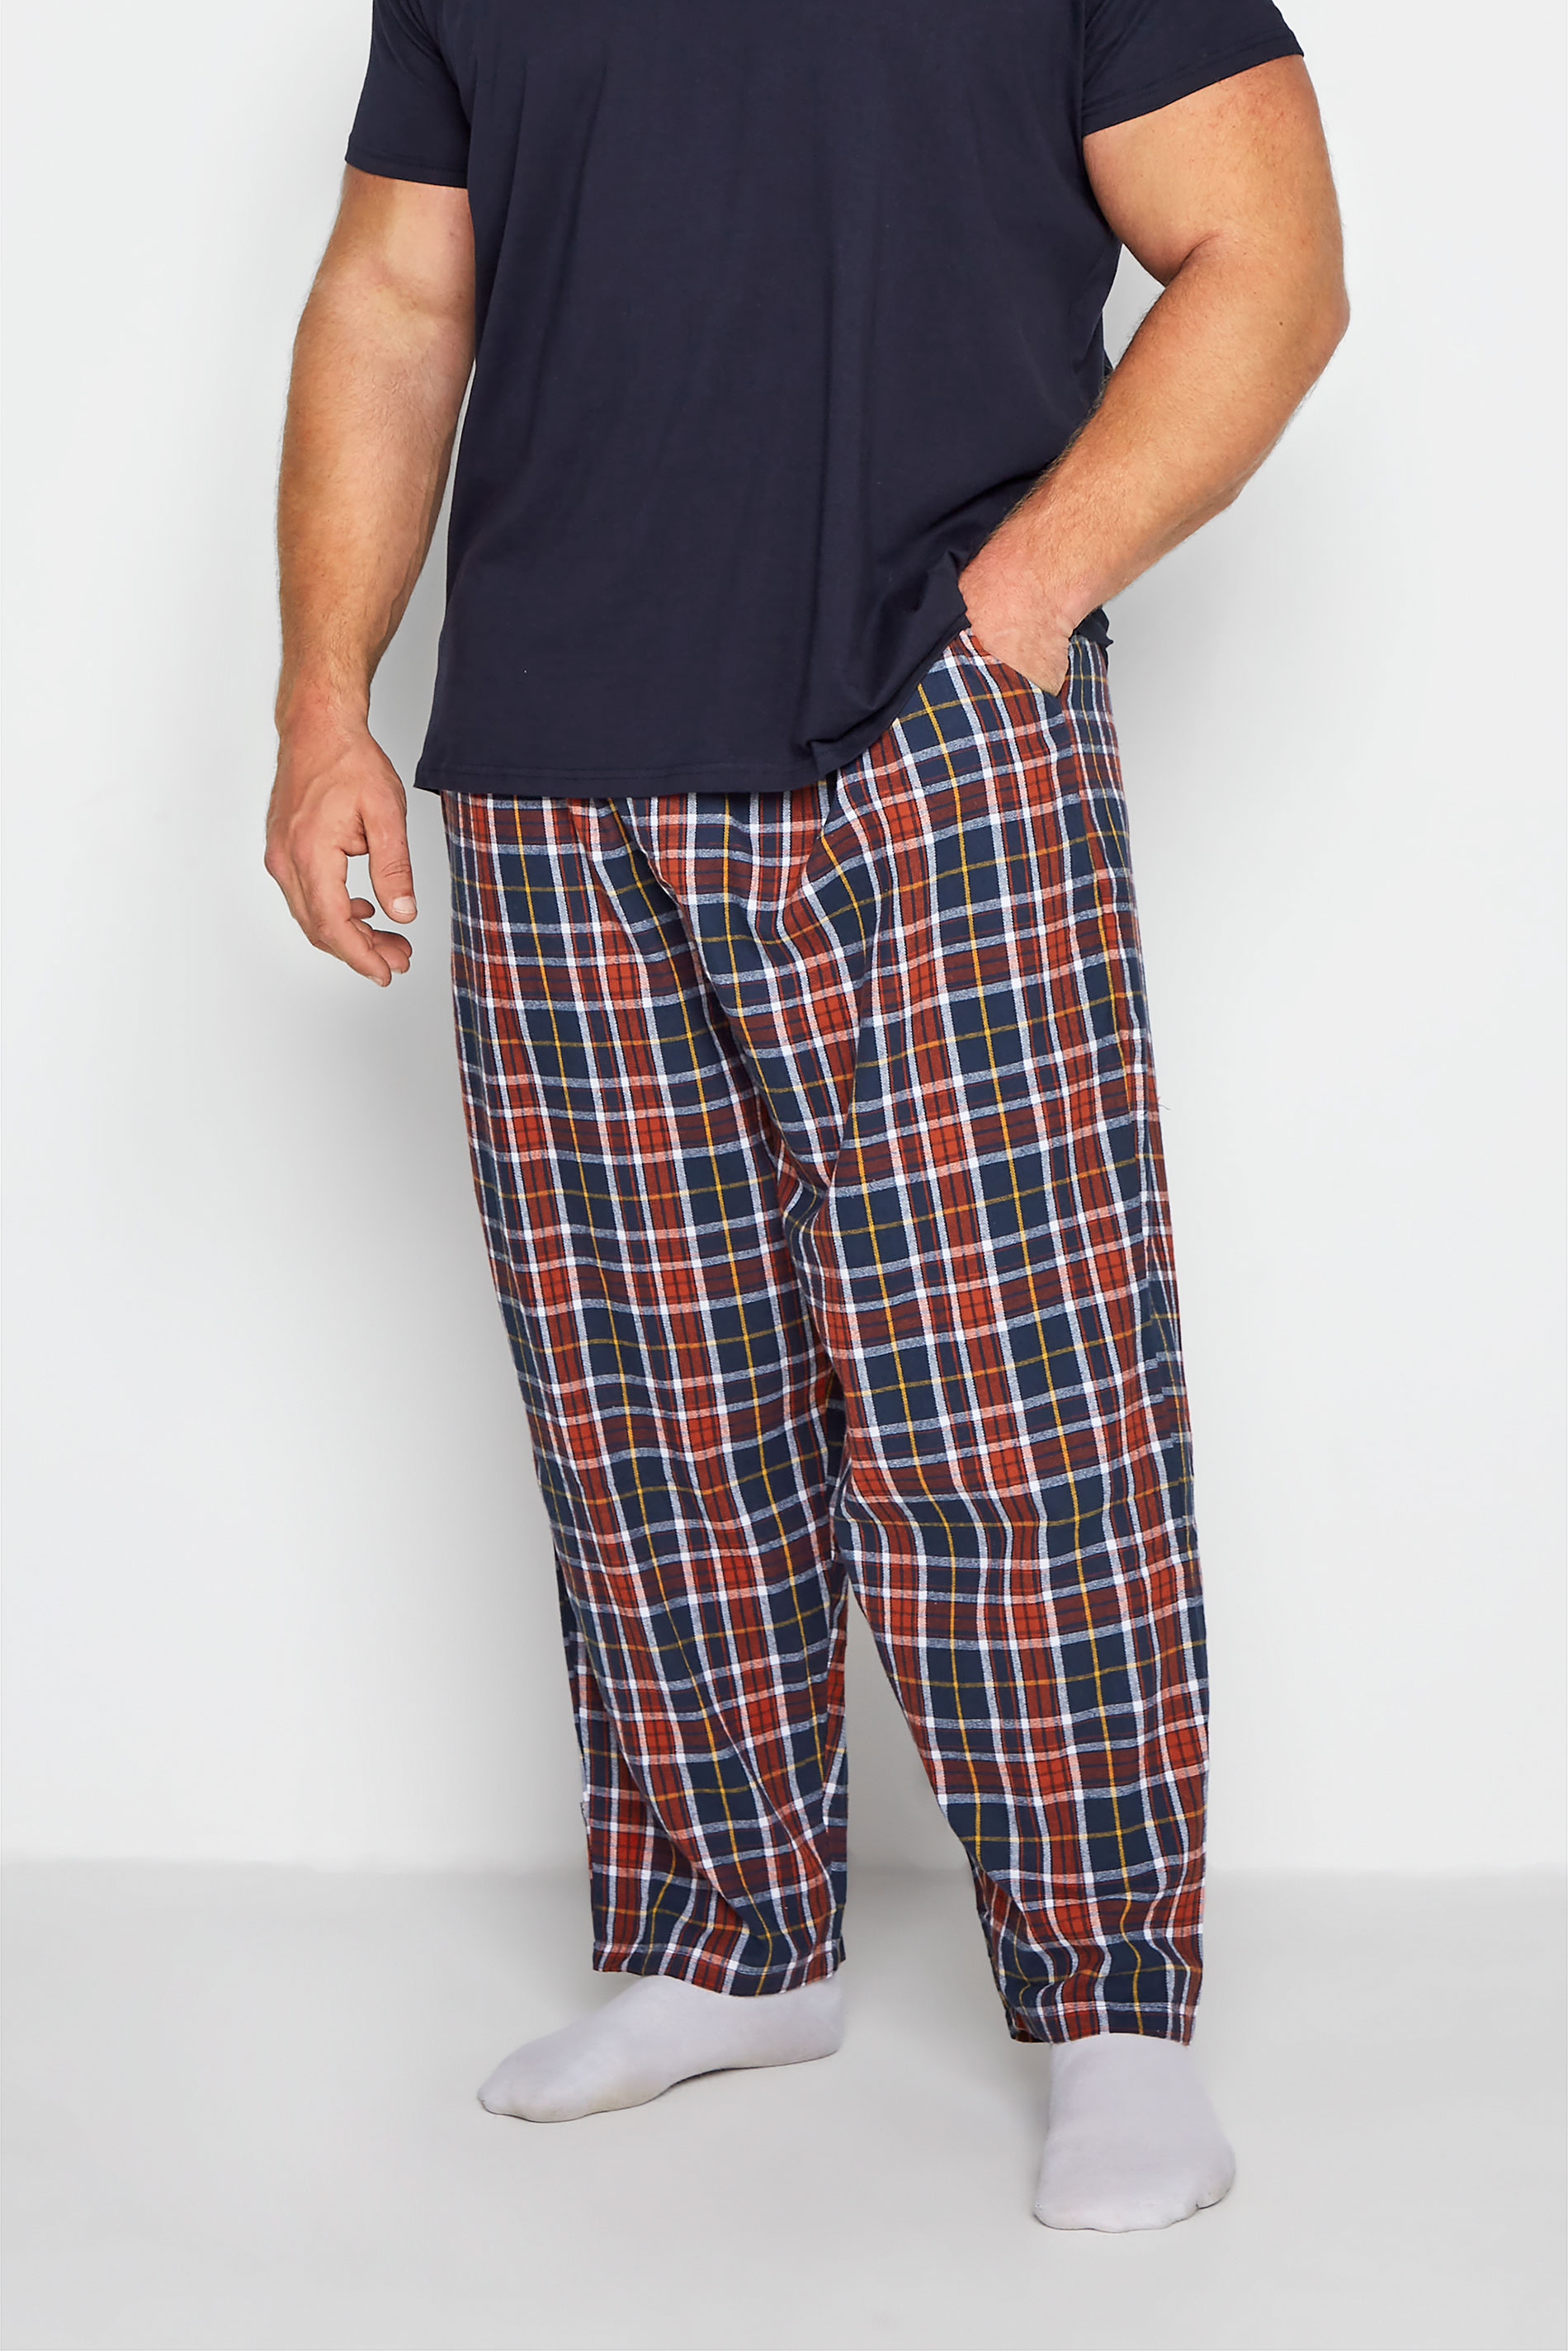 ESPIONAGE Red Brushed Check Lounge Trouser_B.jpg